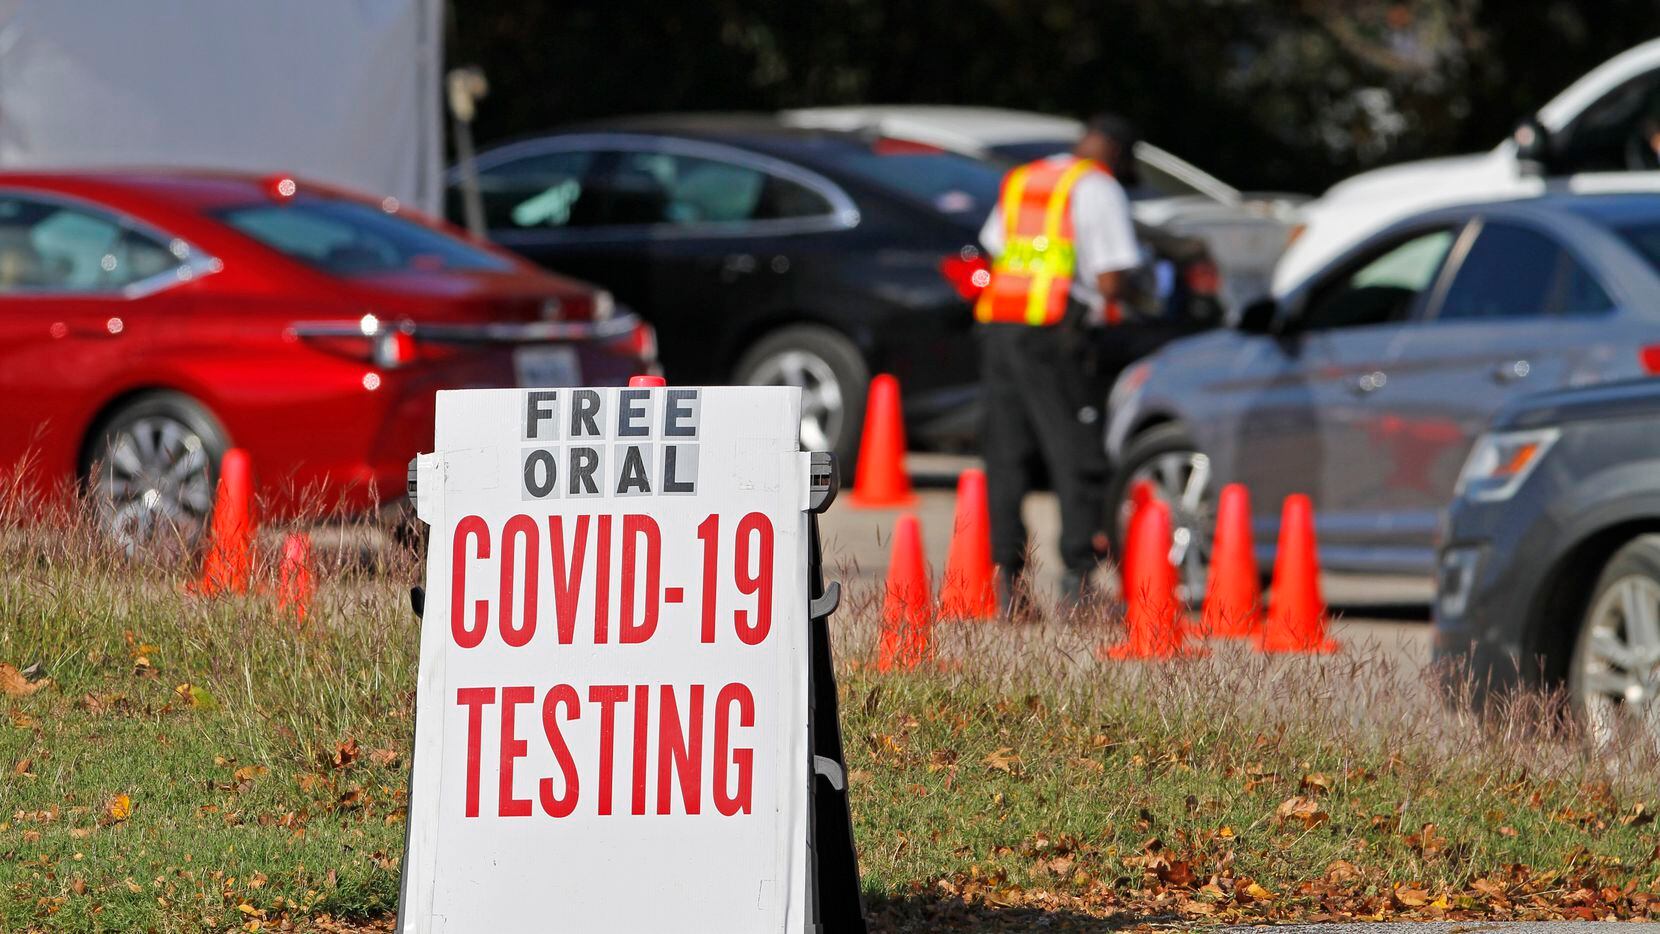 Cars wait in line to receive a COVID-19 oral testing kit at the Good Street Baptist Church testing site in Dallas, on Monday, Nov. 09, 2020. 